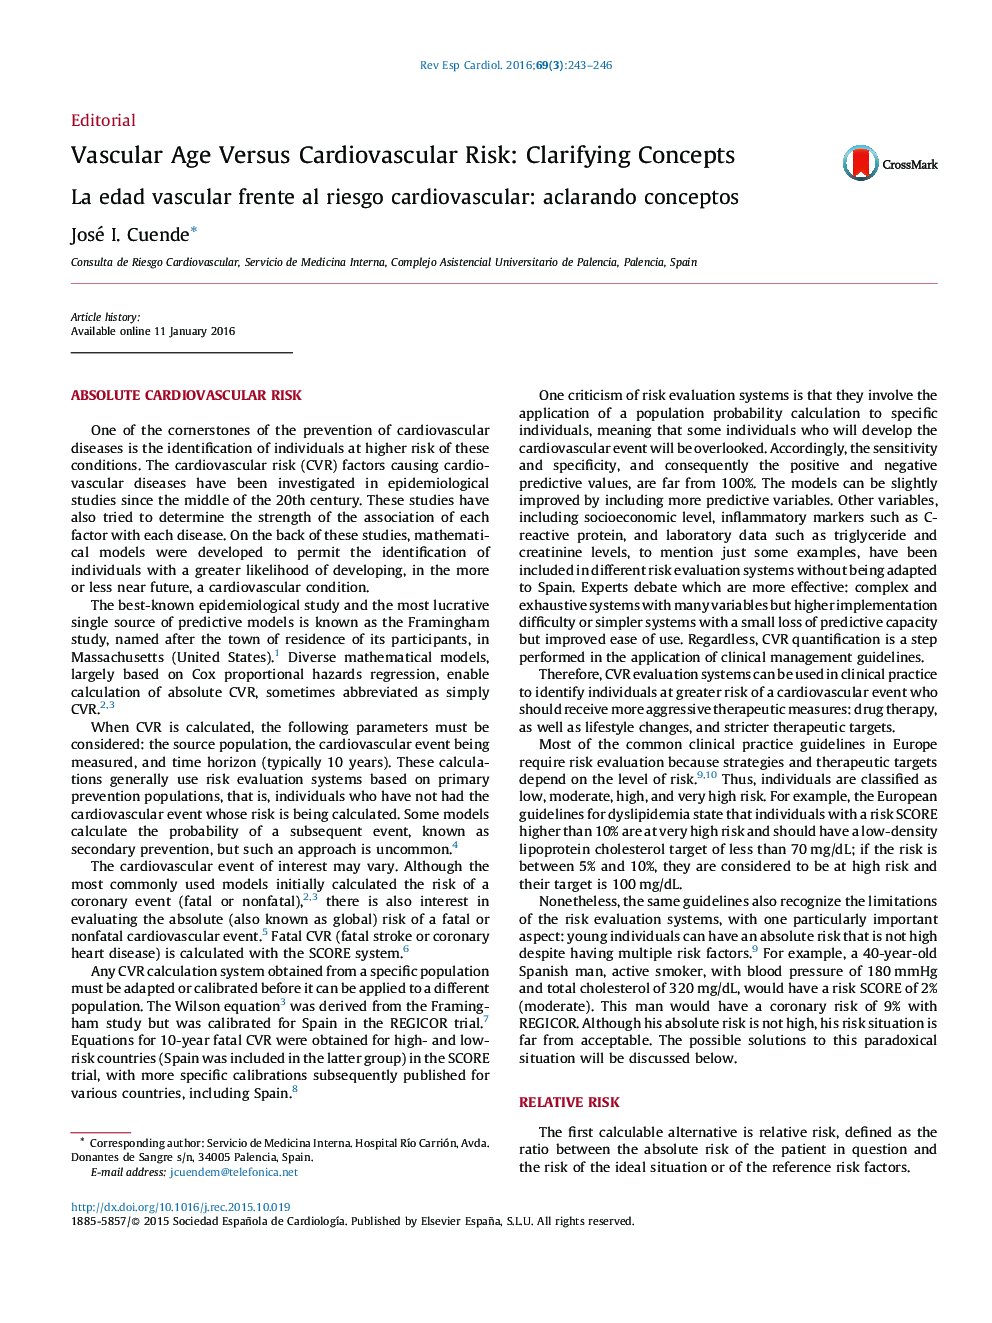 Vascular Age Versus Cardiovascular Risk: Clarifying Concepts